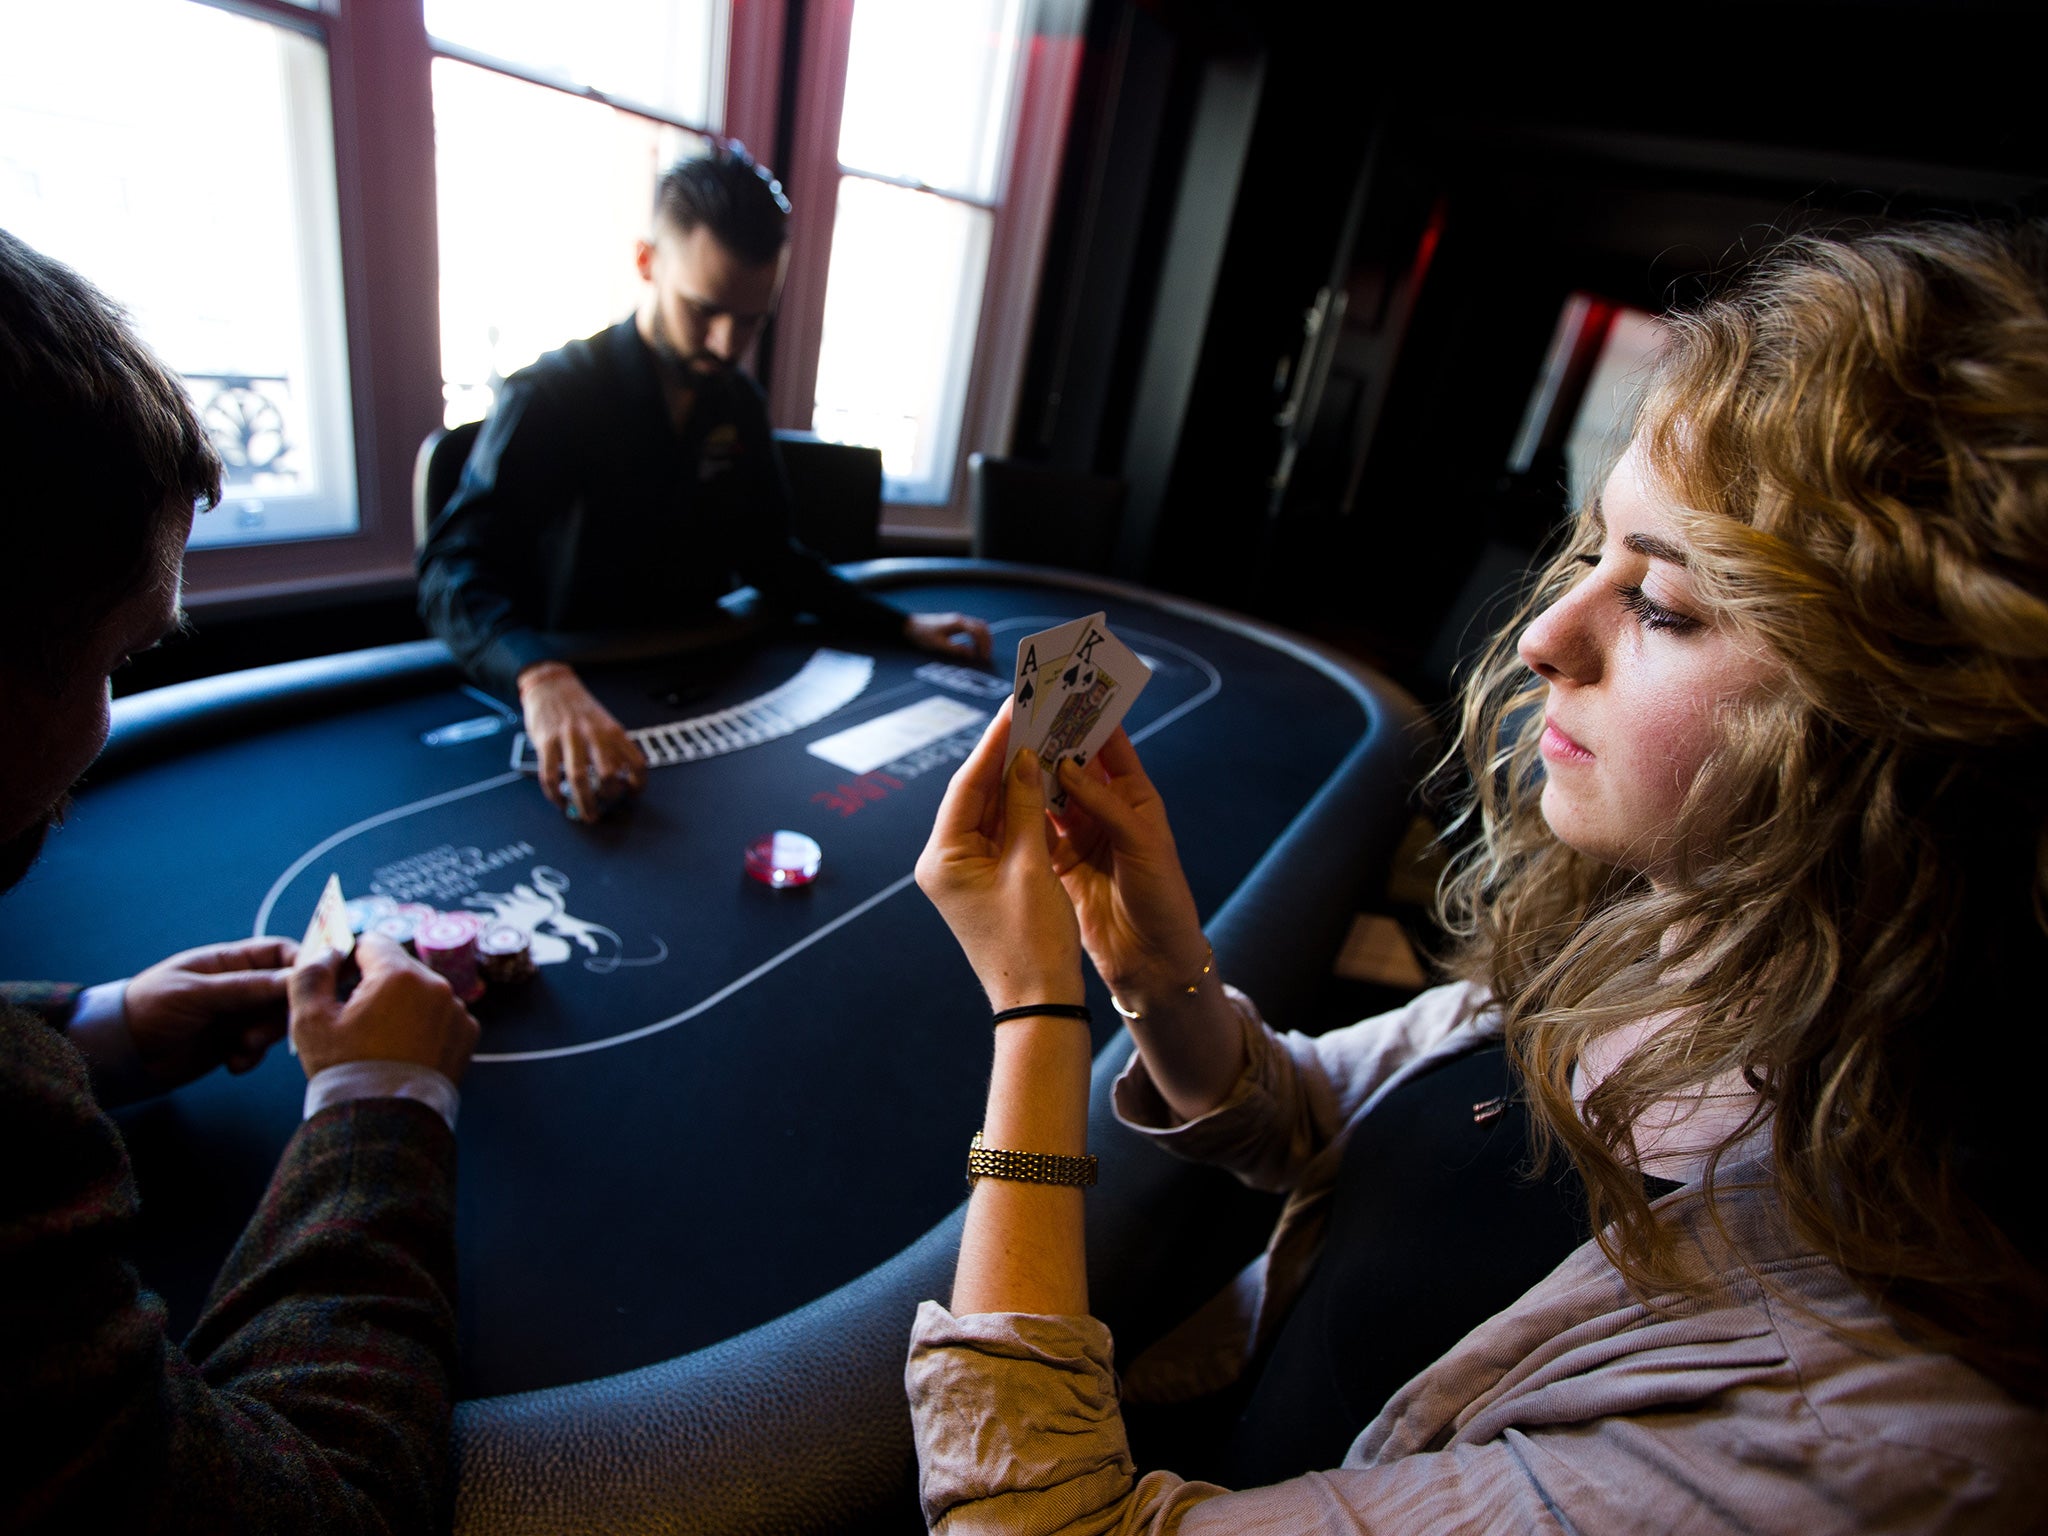 Researchers have agreed that the amount of skill involved in playing poker outweighs the impact of mere chance